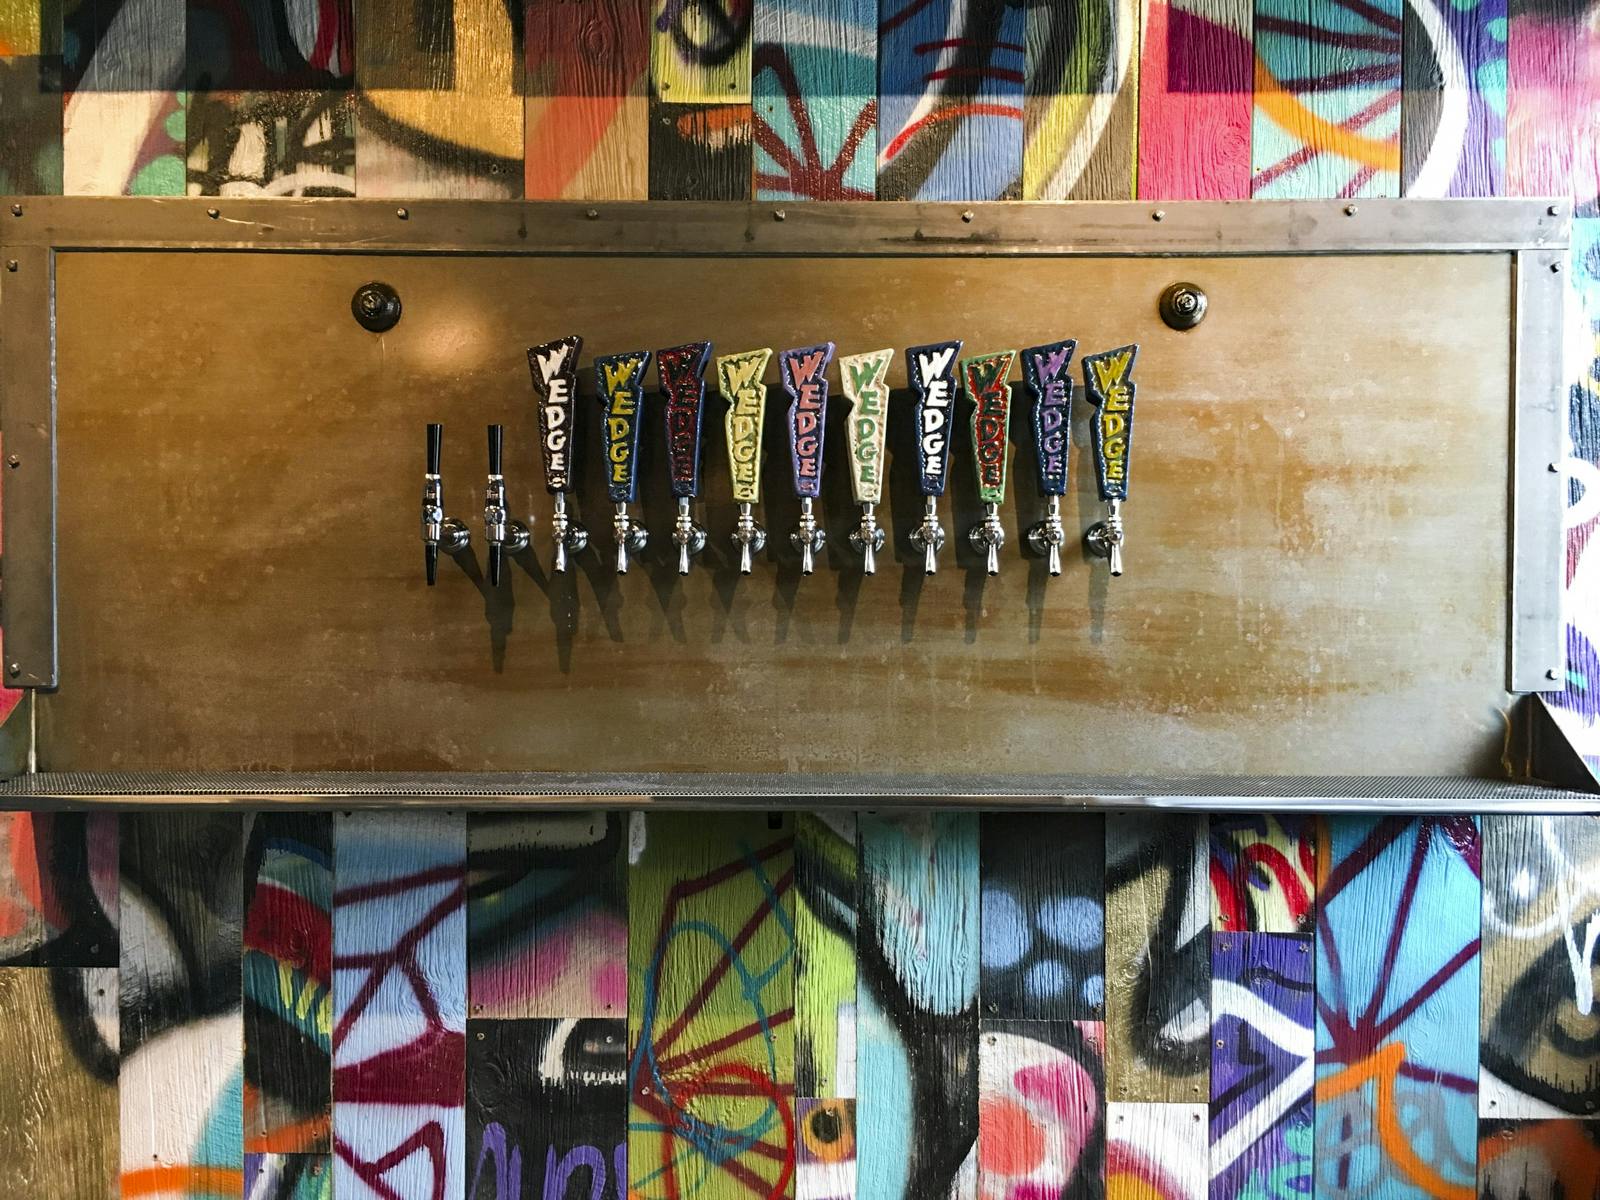 Artistic tap wall with colorful Wedge Brewing tap handles